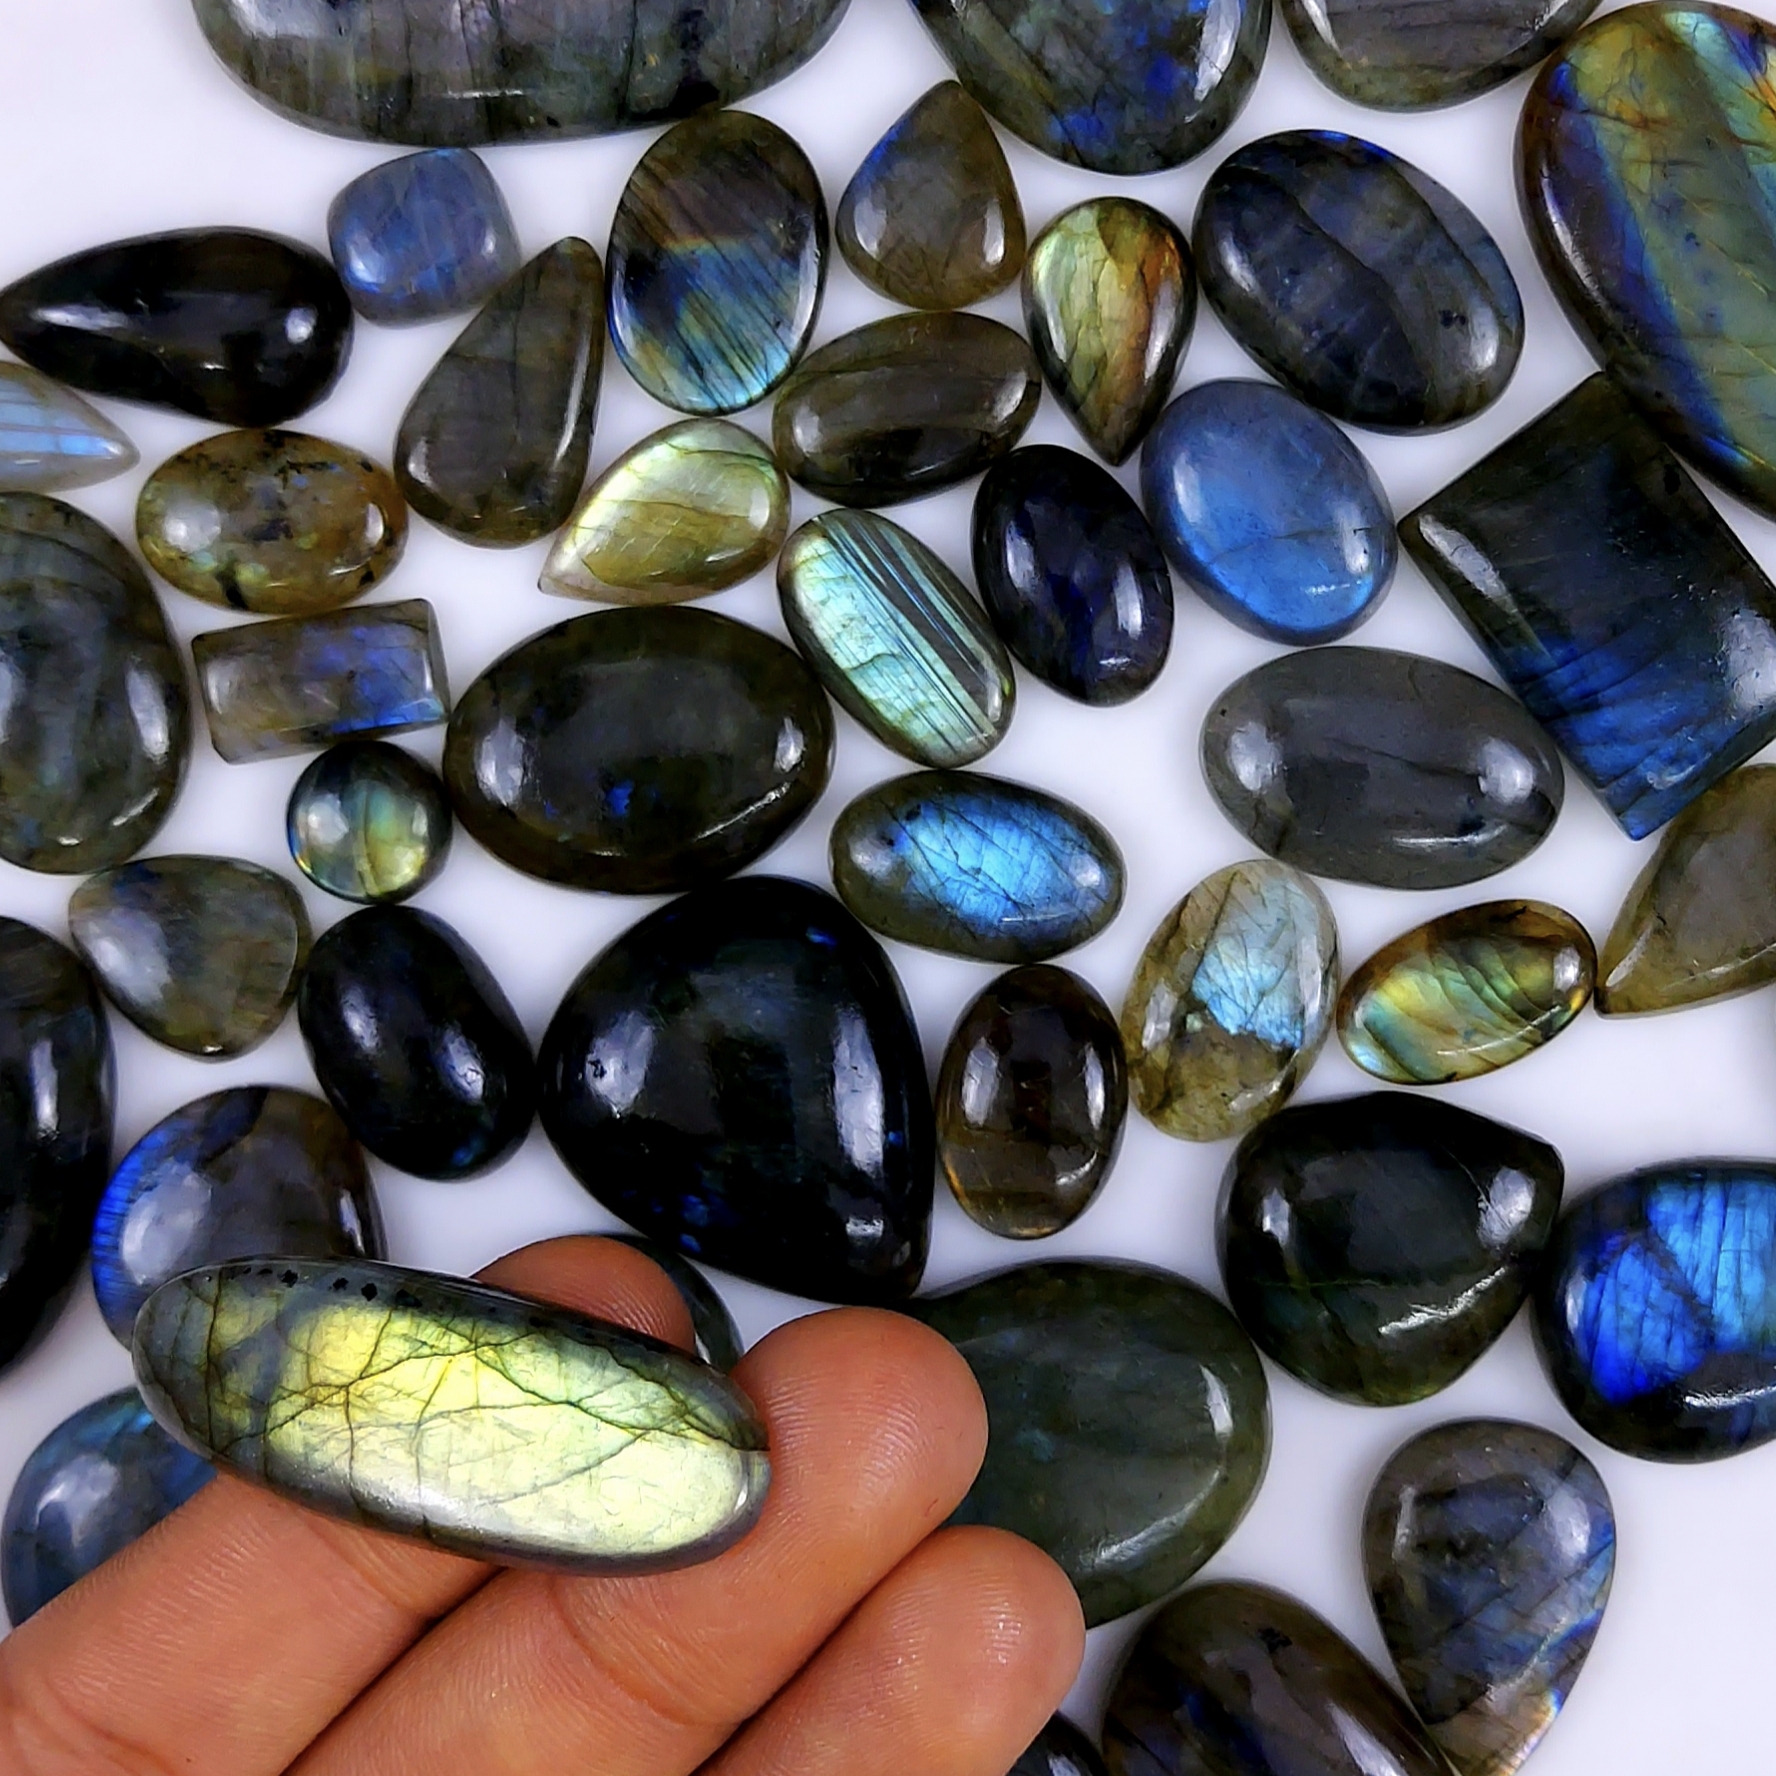 47pc 1453Cts Labradorite Cabochon Multifire Healing Crystal For Jewelry Supplies, Labradorite Necklace Handmade Wire Wrapped Gemstone Pendant 50x30 12x12mm#6302